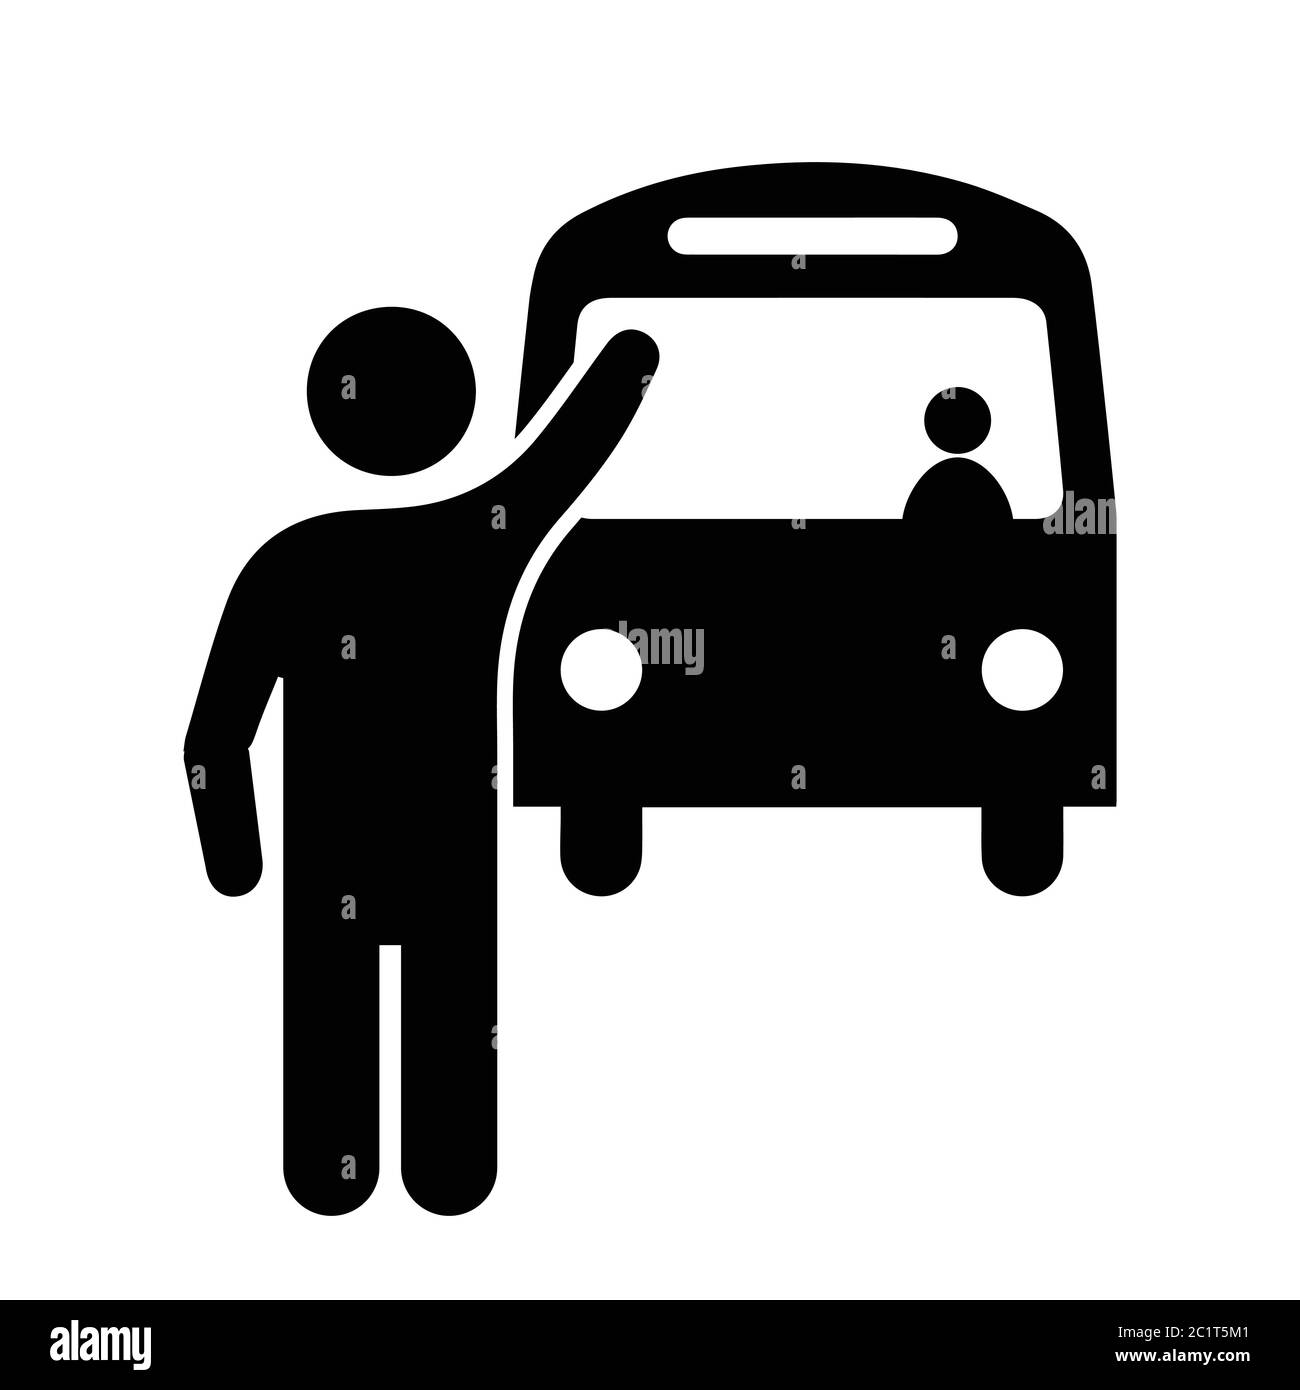 Stick Figure Man Stopping Waving at Bus. Black Illustration Isolated on a White Background. EPS Vector Stock Vector